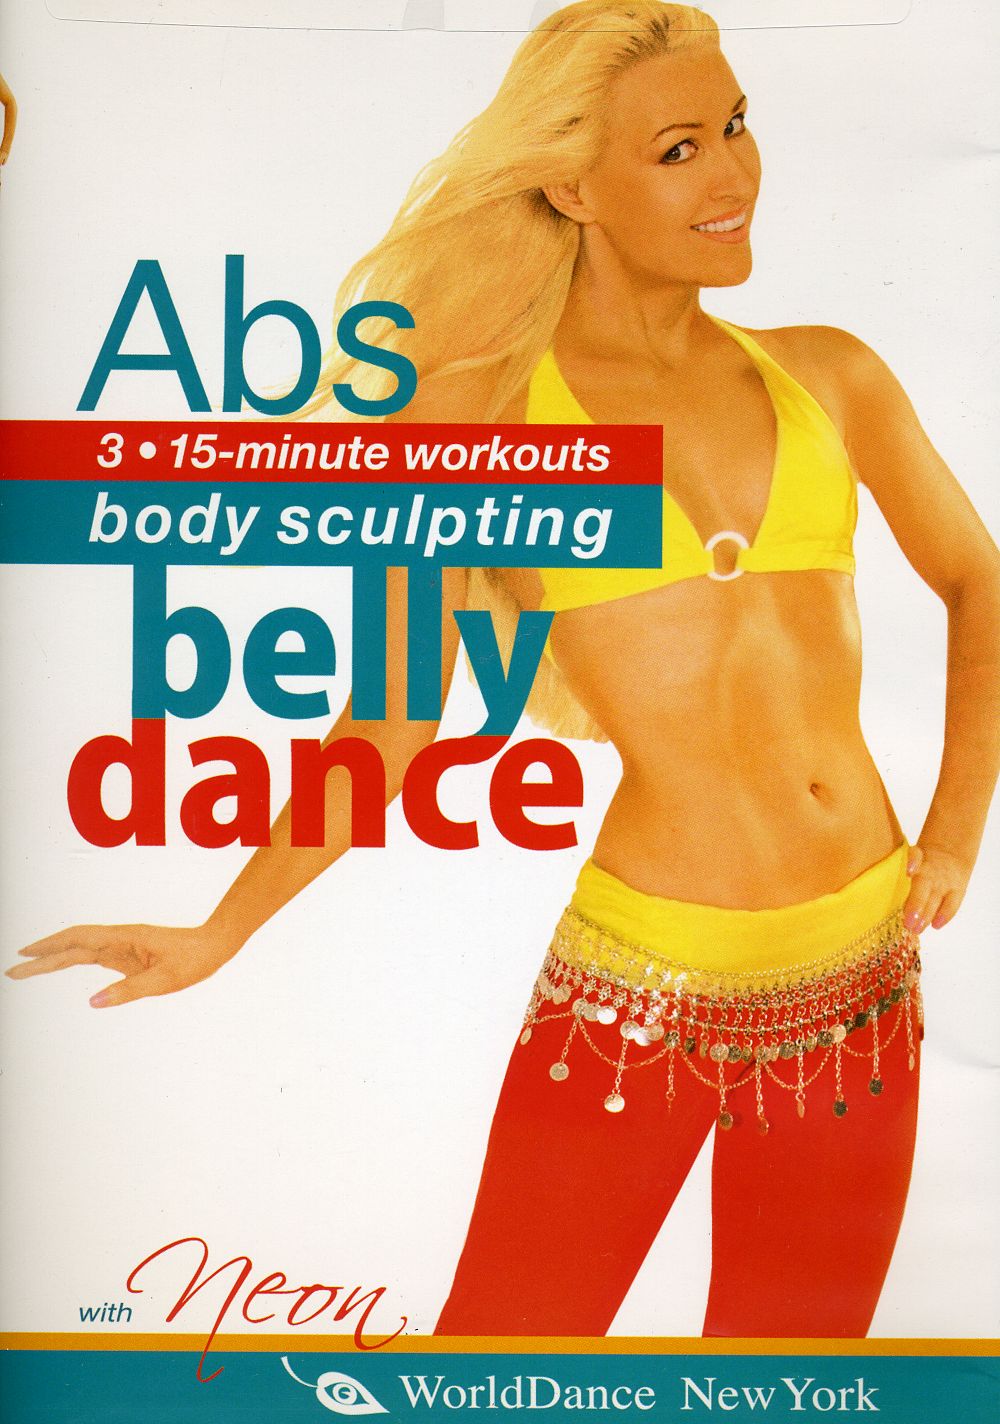 BELLYDANCE FOR BODY SHAPING: ABS